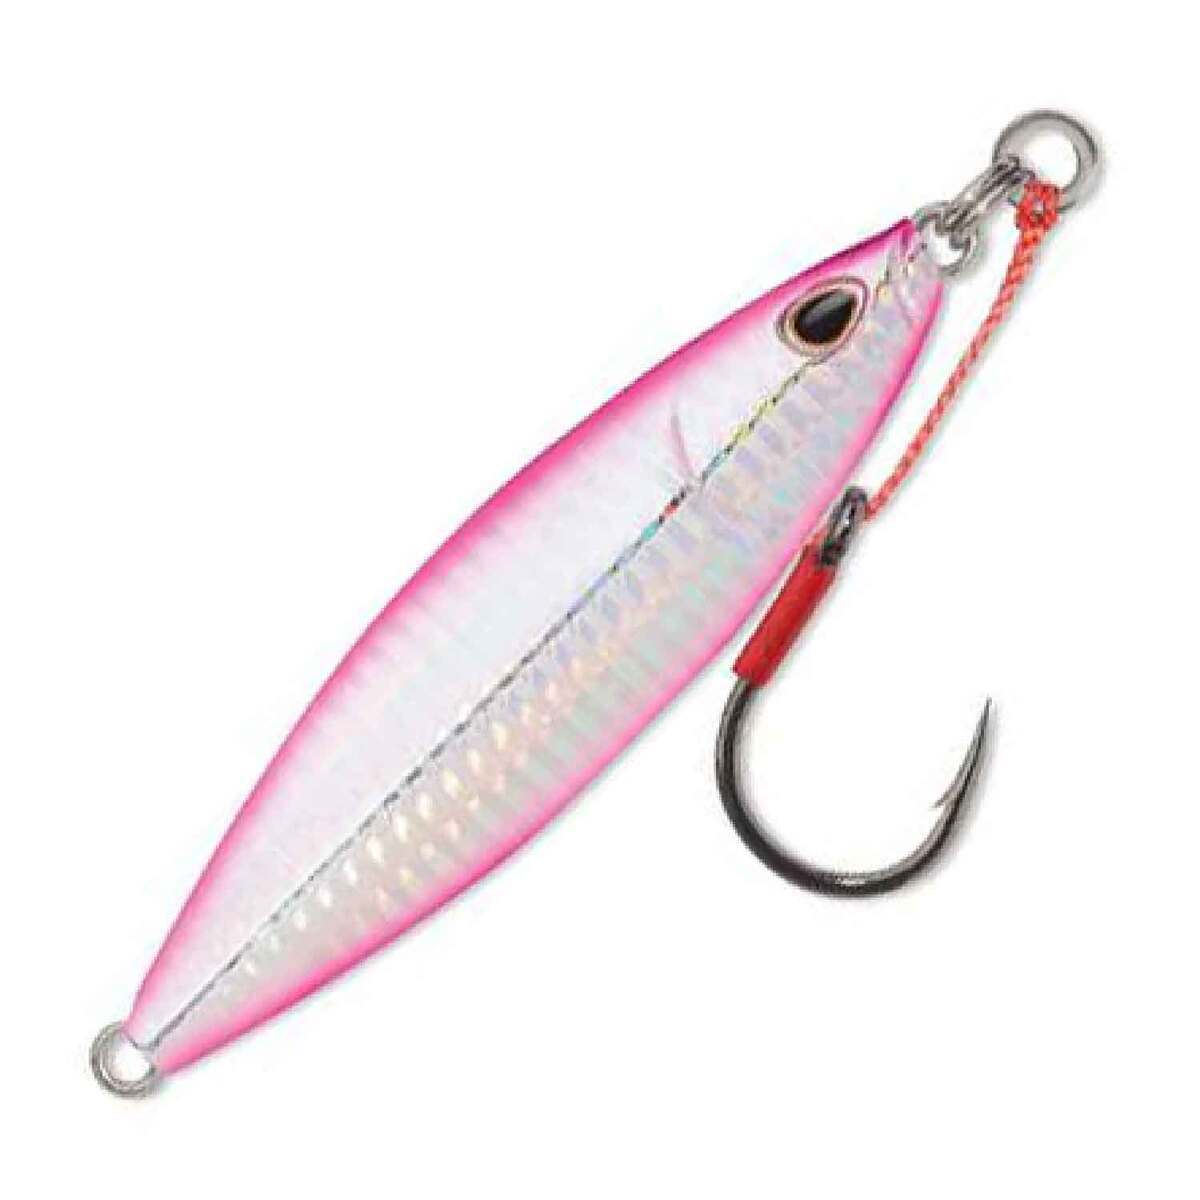 Williamson Silver Fishing Lures